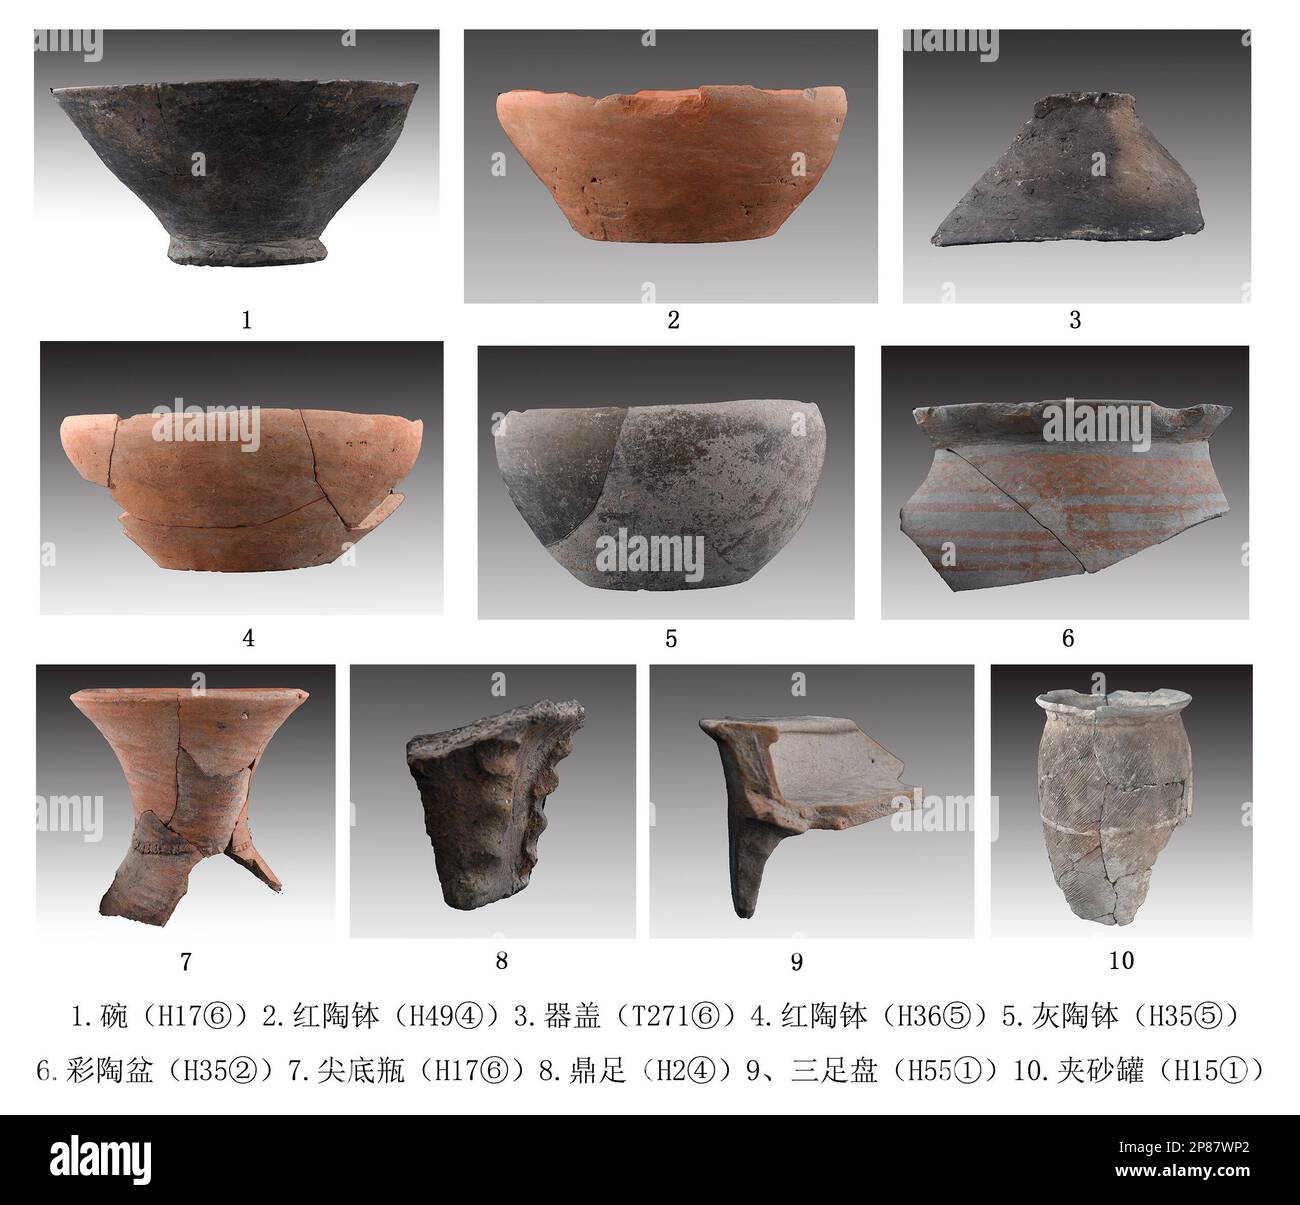 Taiyuan. 9th Mar, 2023. This undated photo provided by the Shanxi provincial institute of archaeology shows pottery articles unearthed from the Yuancun relics site dating back to the late period of the Yangshao Culture some 5,000 to 7,000 years ago at Yuancun Village of Xiaxian County in Yuncheng City, north China's Shanxi Province. TO GO WITH 'Centuries-old artifacts found in China's relic-rich province' Credit: Xinhua/Alamy Live News Stock Photo